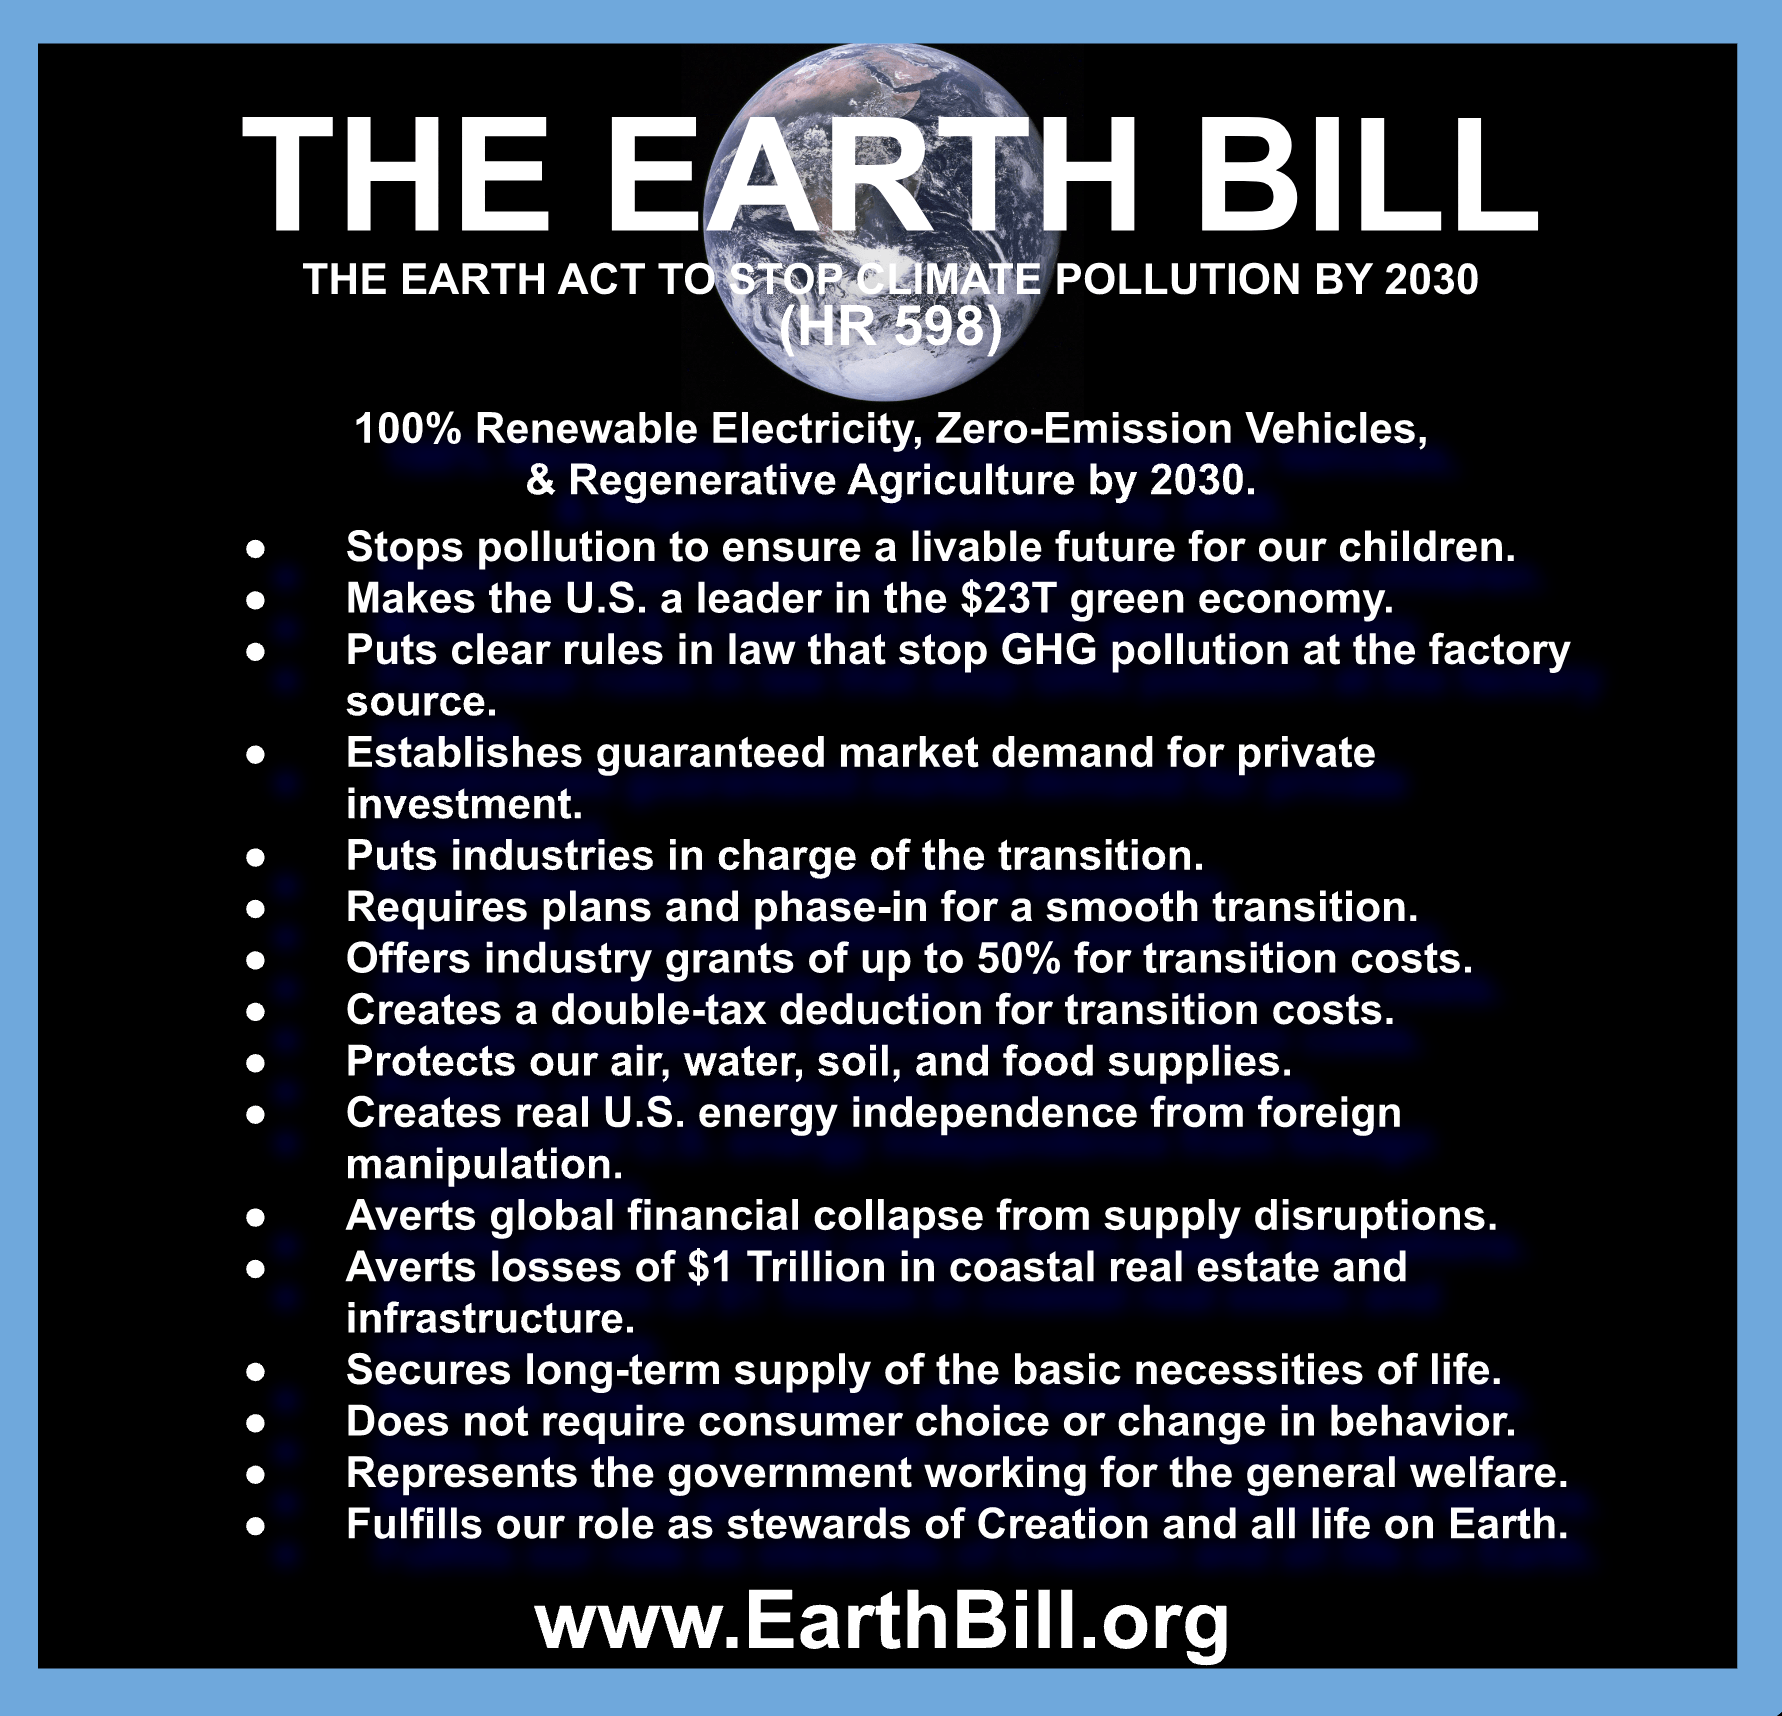 A list of features of the earth bill highlighted by 100% renewable electricity, zero-emission vehichles, and regenerative agriculture by 2030.